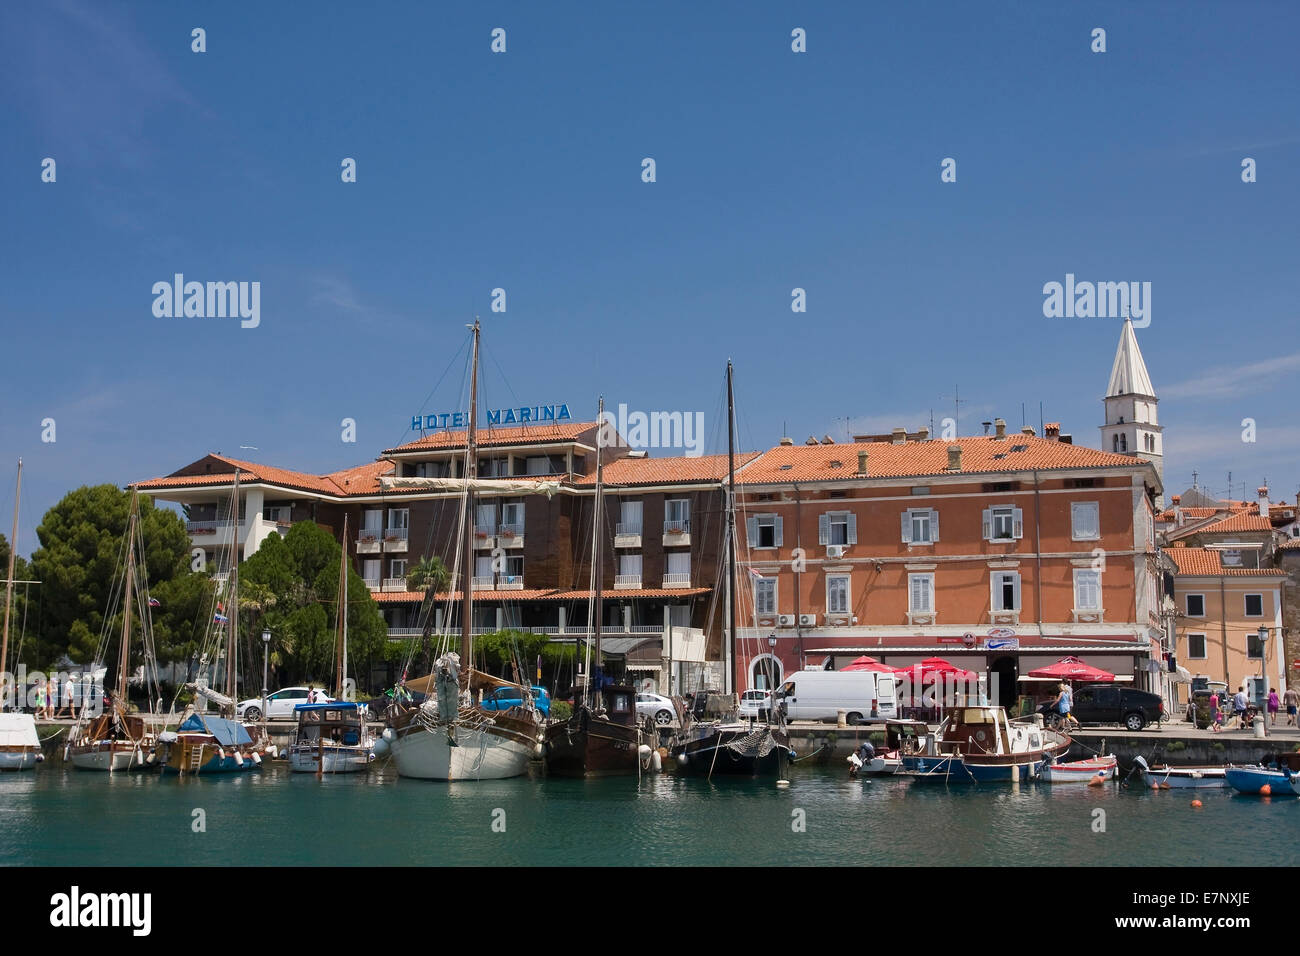 Adriatic, boats, Europe, harbours, ports, harbour, port, Istria, Izola, yachts, yacht harbour, Marina, motorboats, Mediterranean Stock Photo